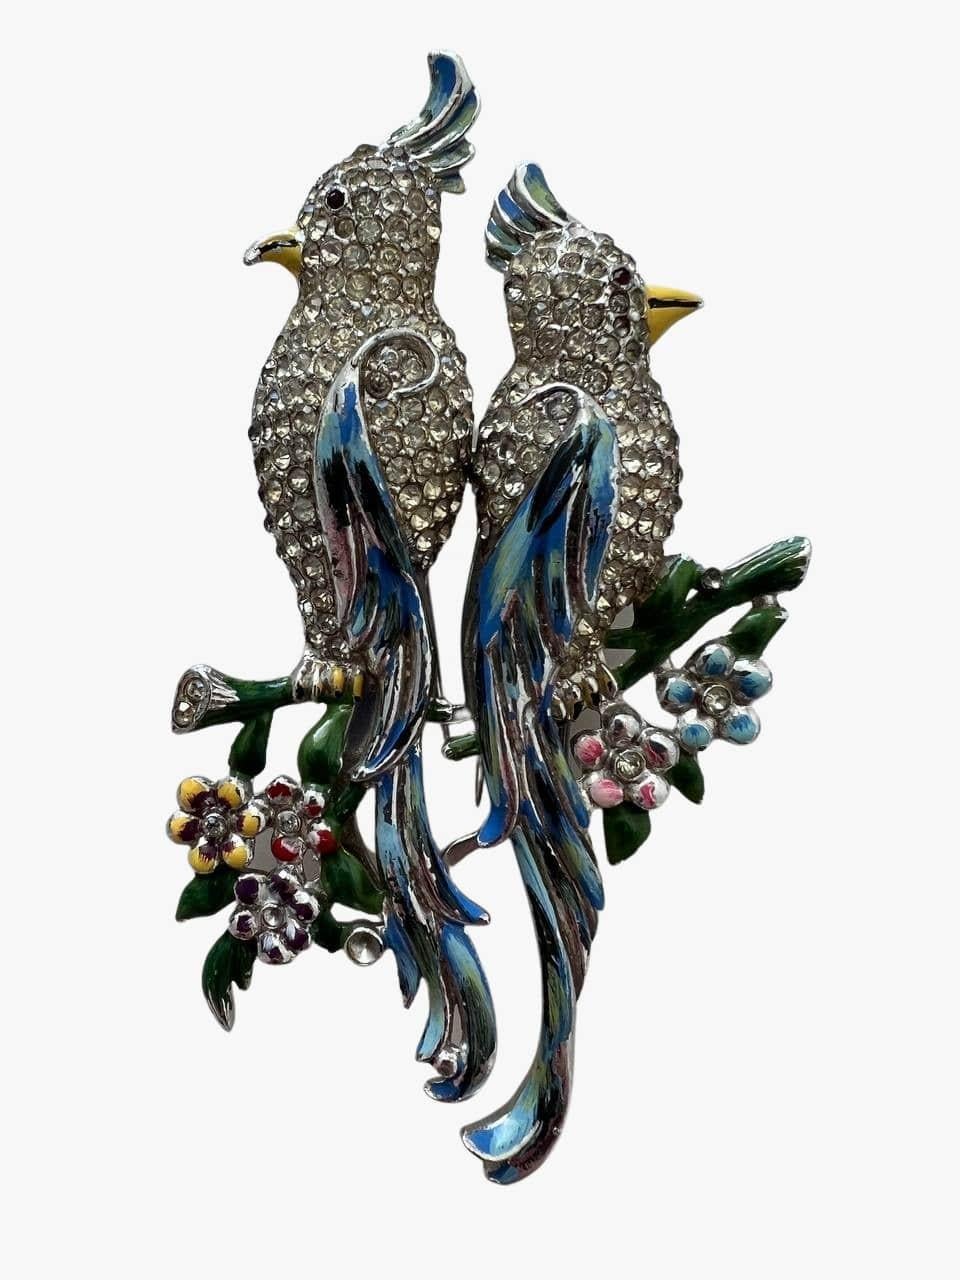 Vintage iconic brooch by Coro features two parrots on a tree branch. Lavishly decorated with rhinestones and accented with colorful enamel details. 
The base metal: sterling silver. The brooch also has fur clips. 
Signed: Coro Duette
AT: 1798867